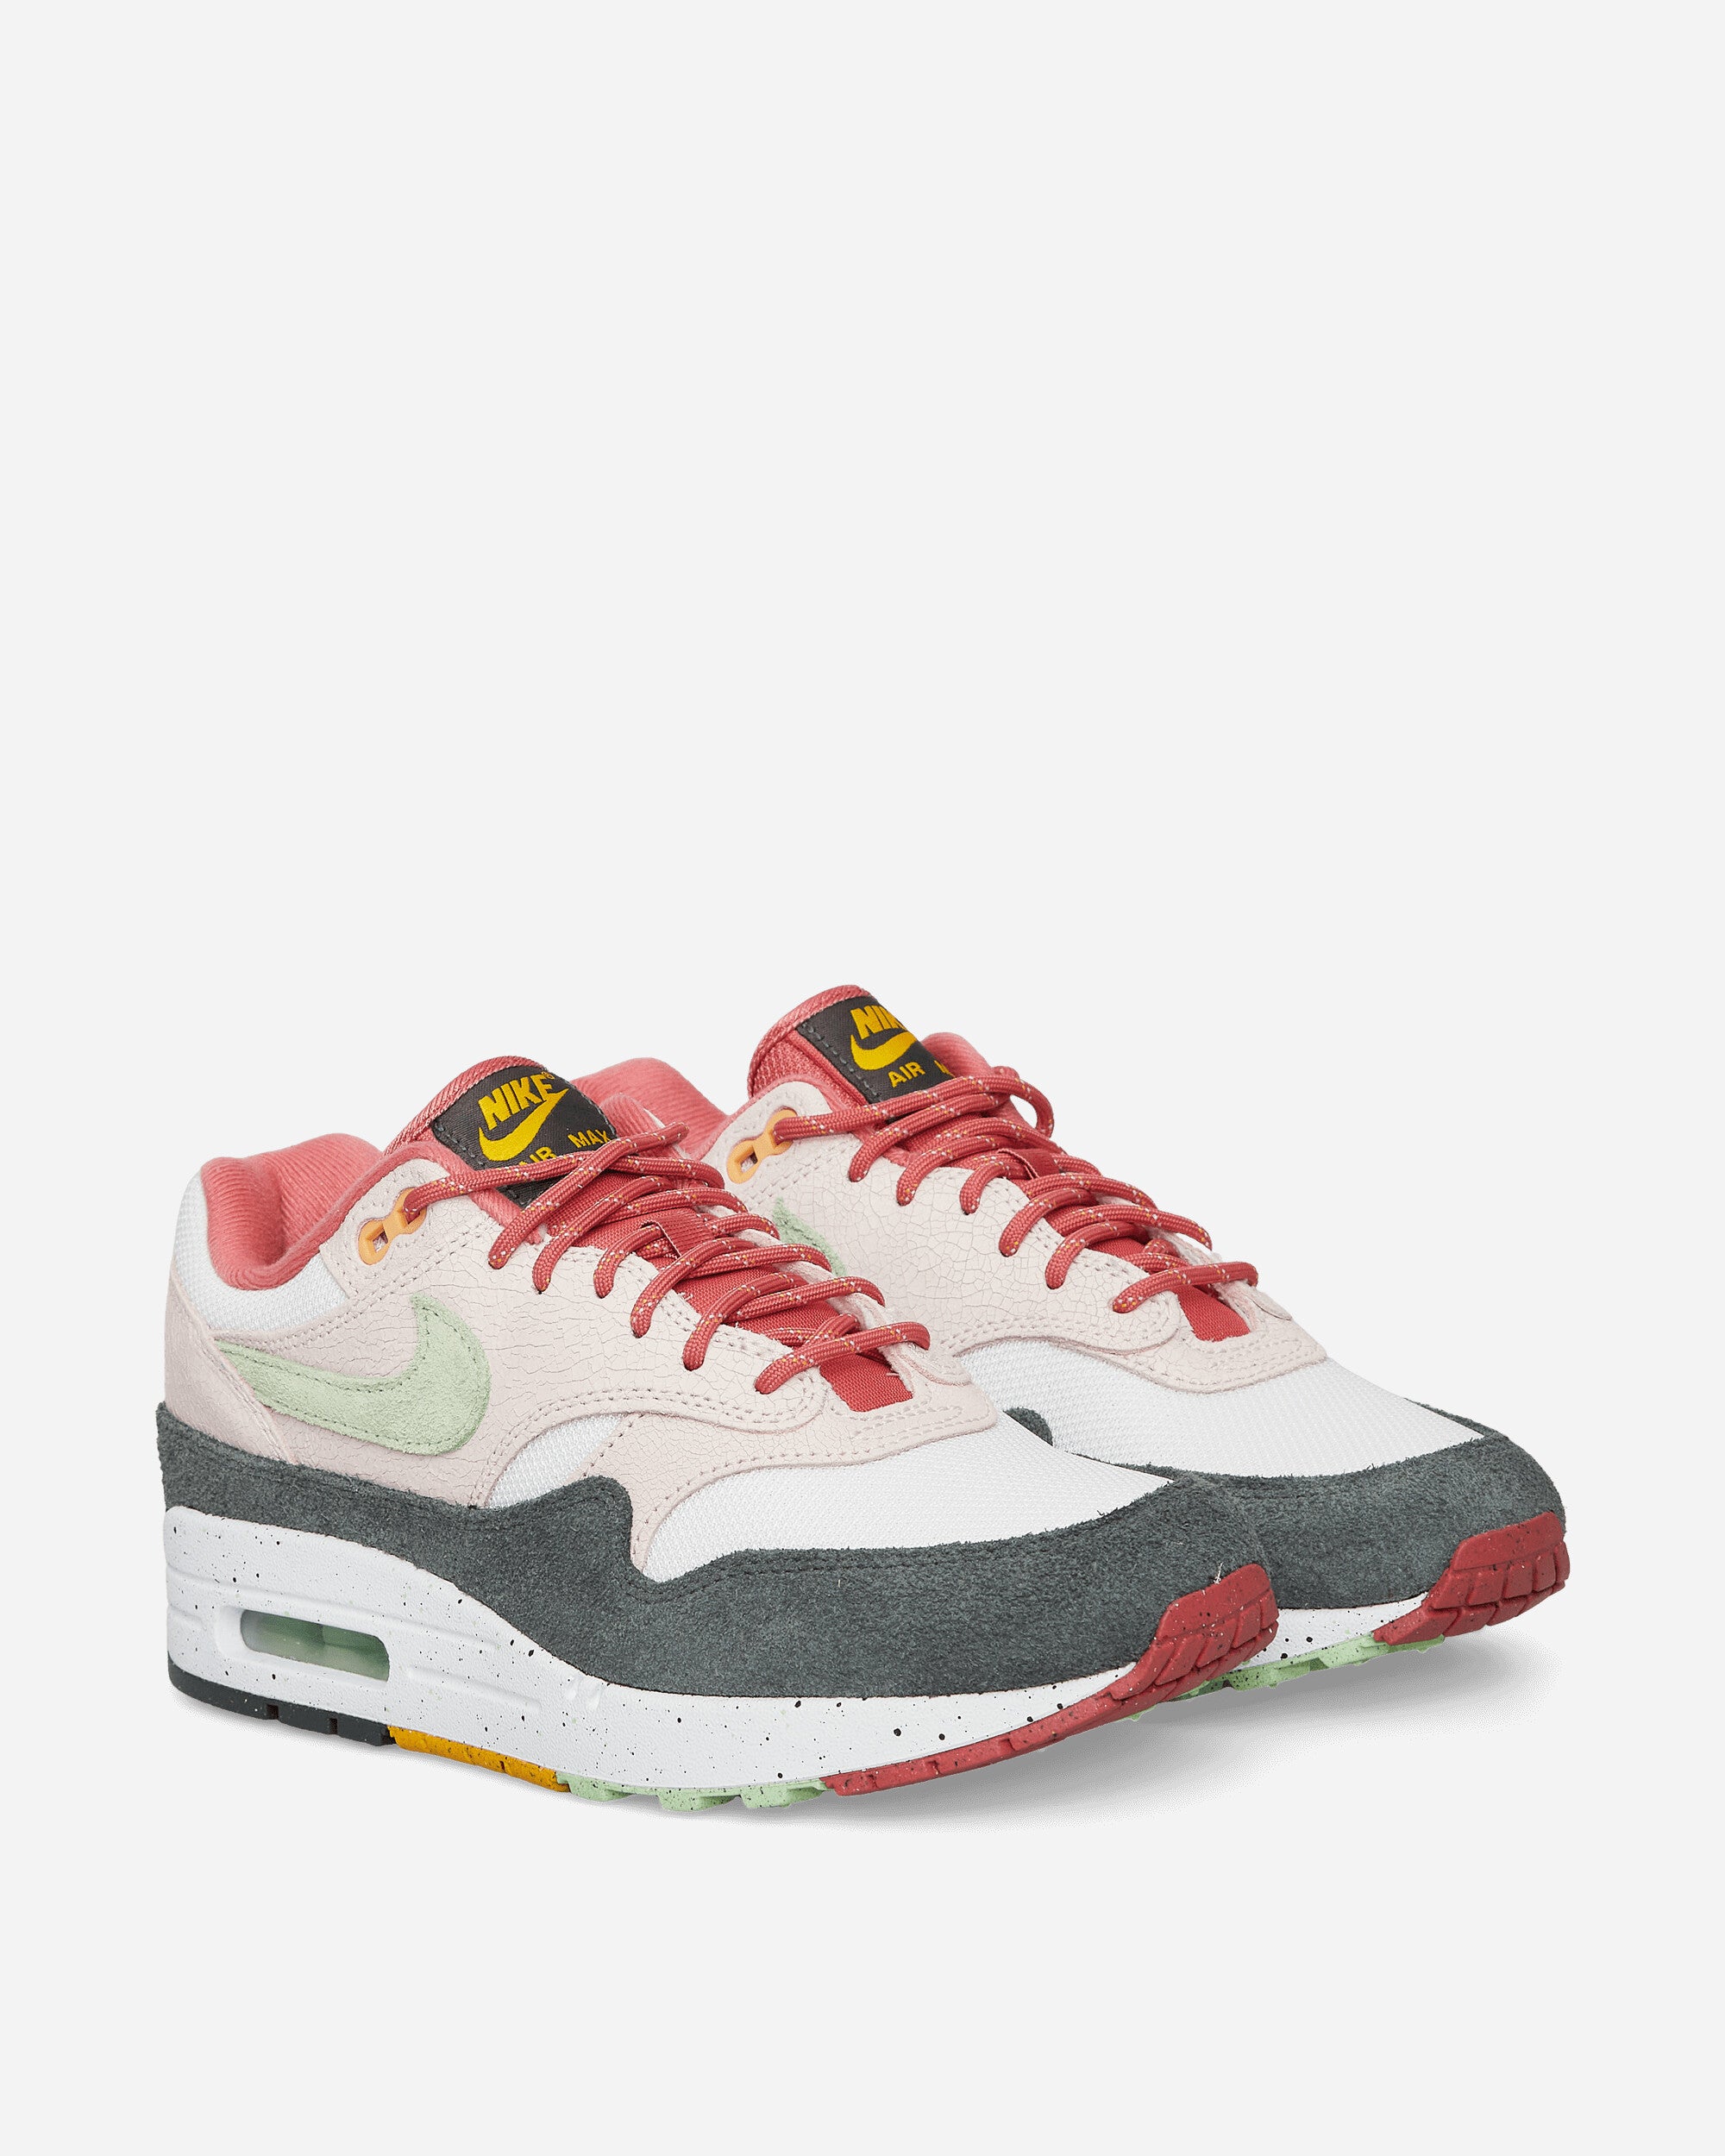 Air Max 1 Sneakers Light Soft Pink